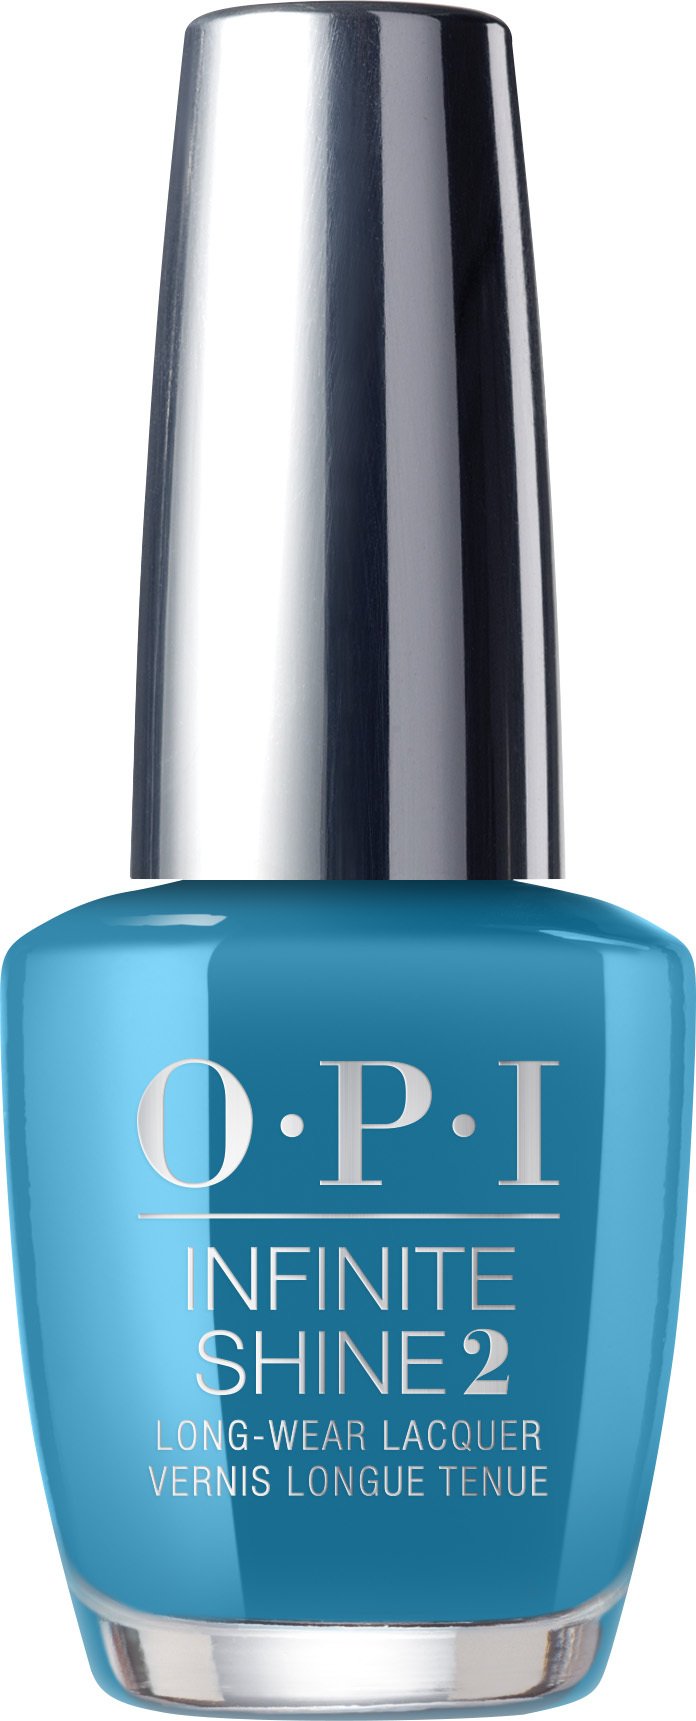 OPI Infinite Shine - OPI Grabs the Unicorn by the Horn